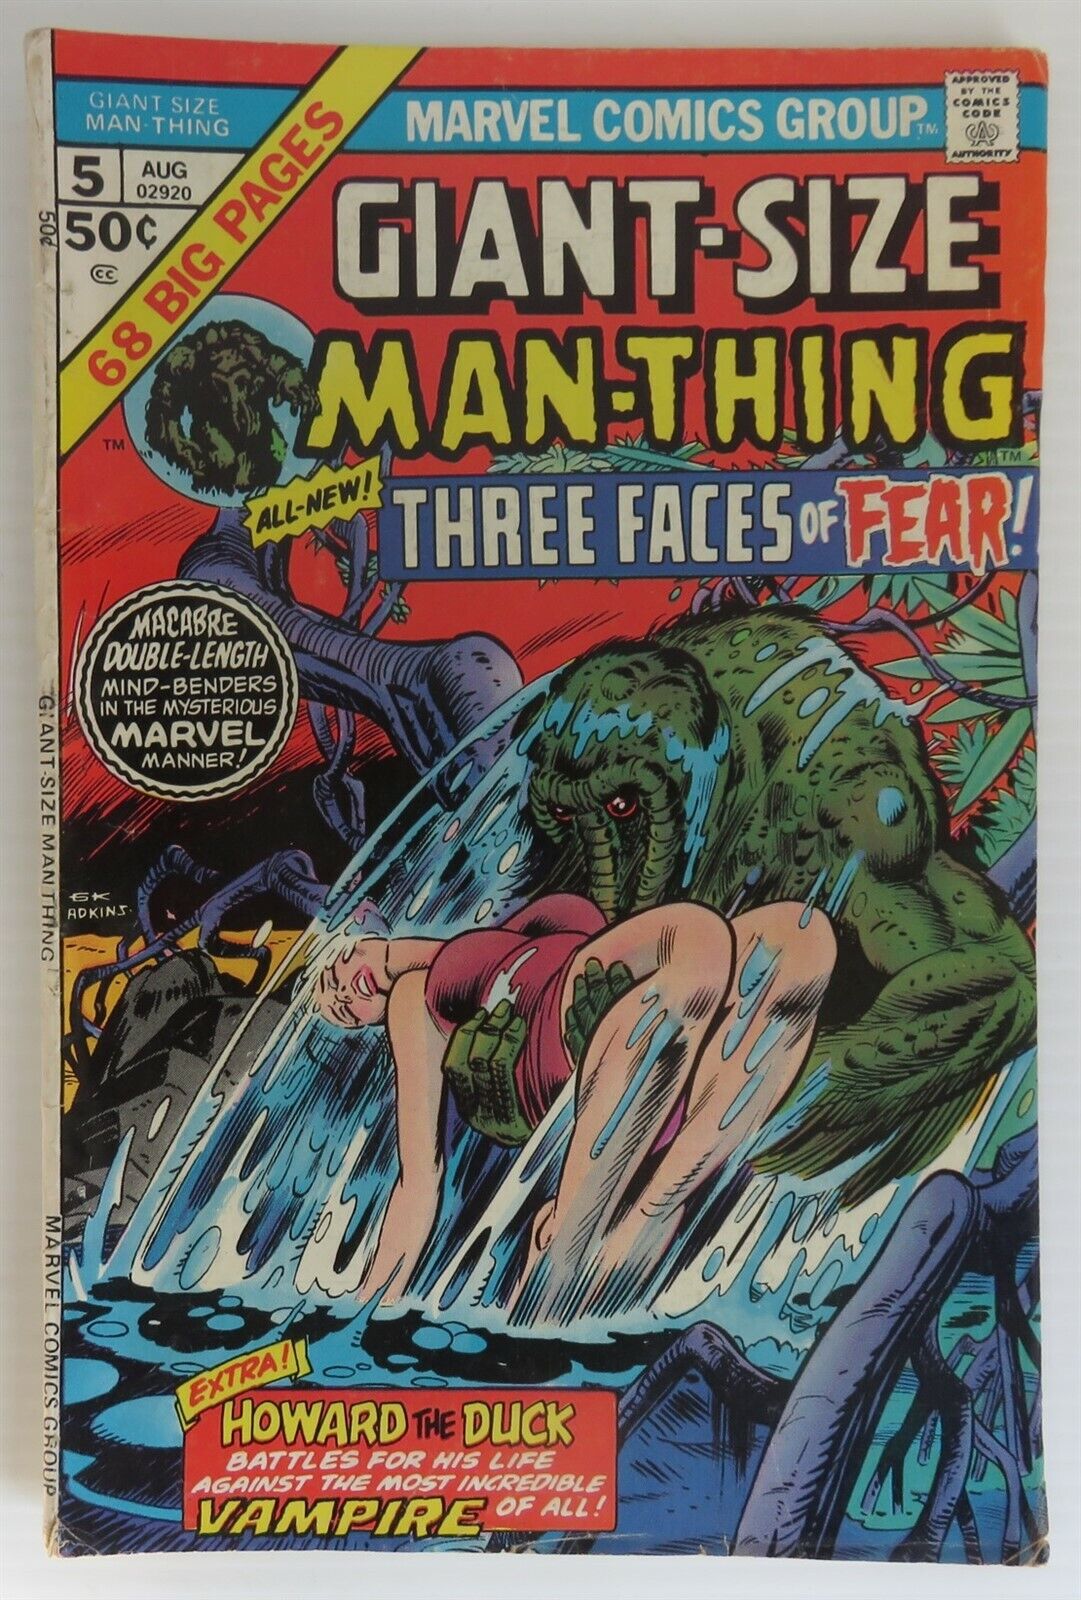 1975 GIANT SIZE MAN-THING #5 - VG         (INV30880)